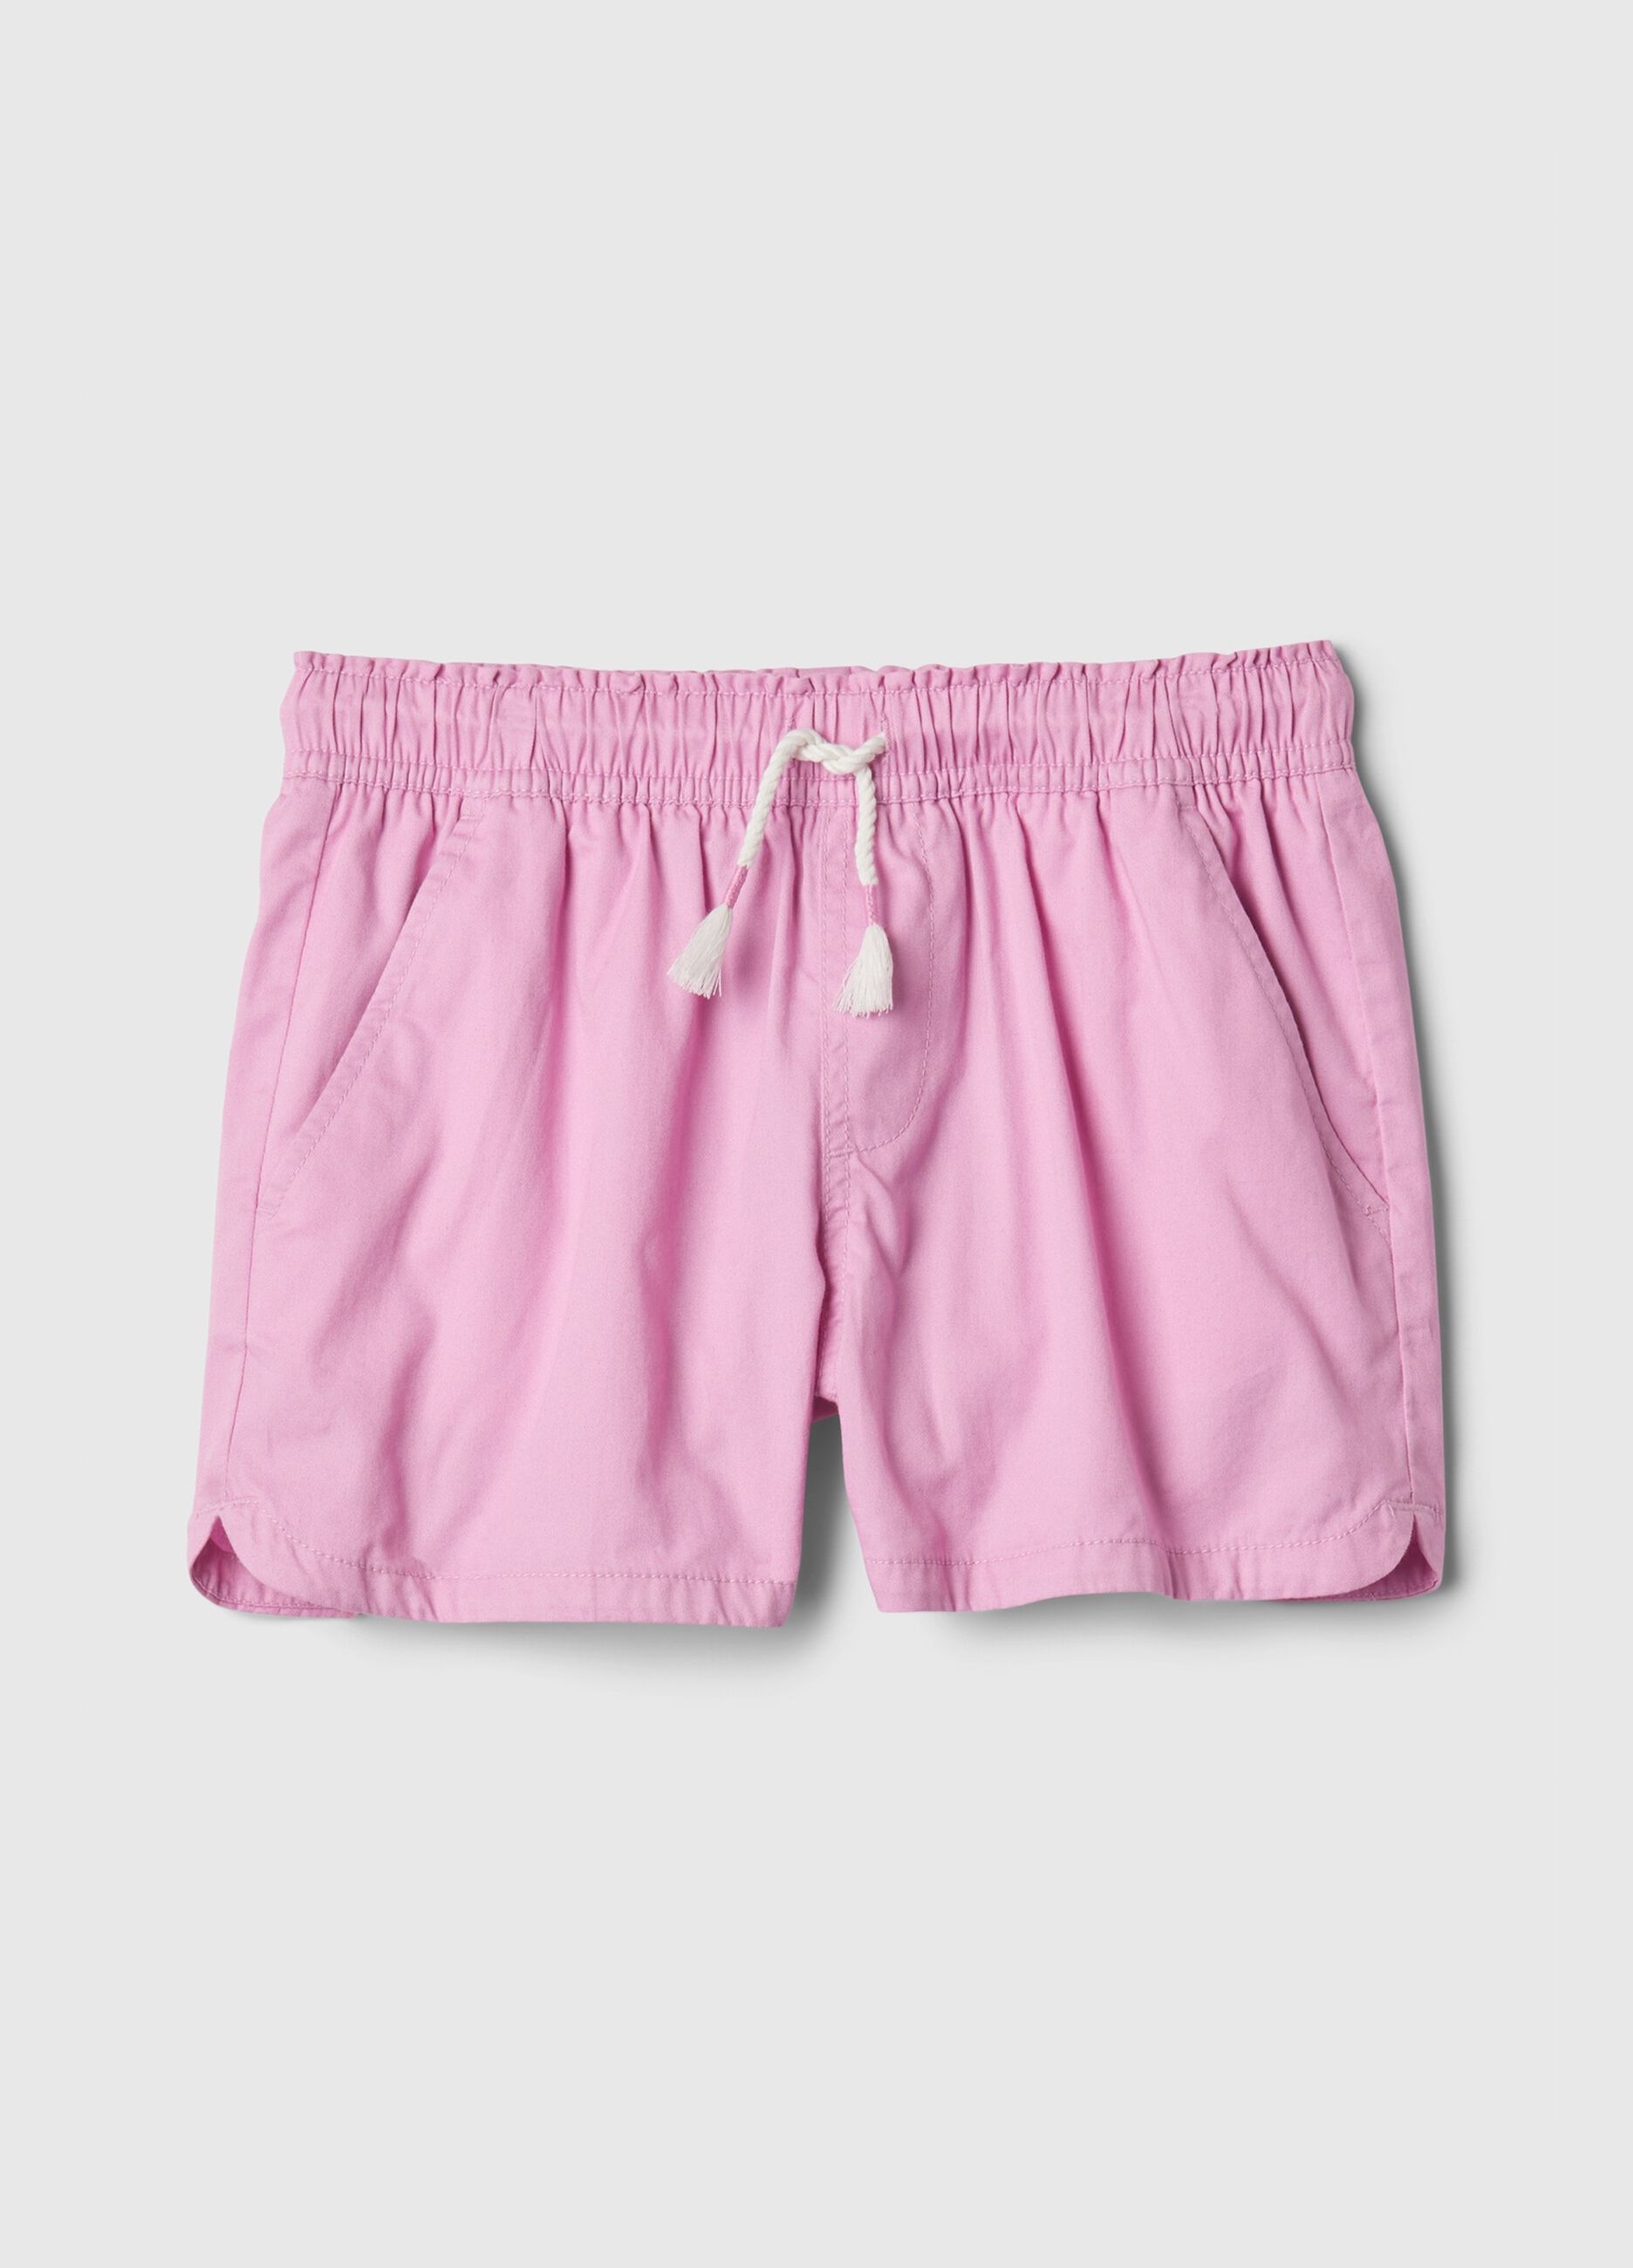 Shorts with drawstring and tassels